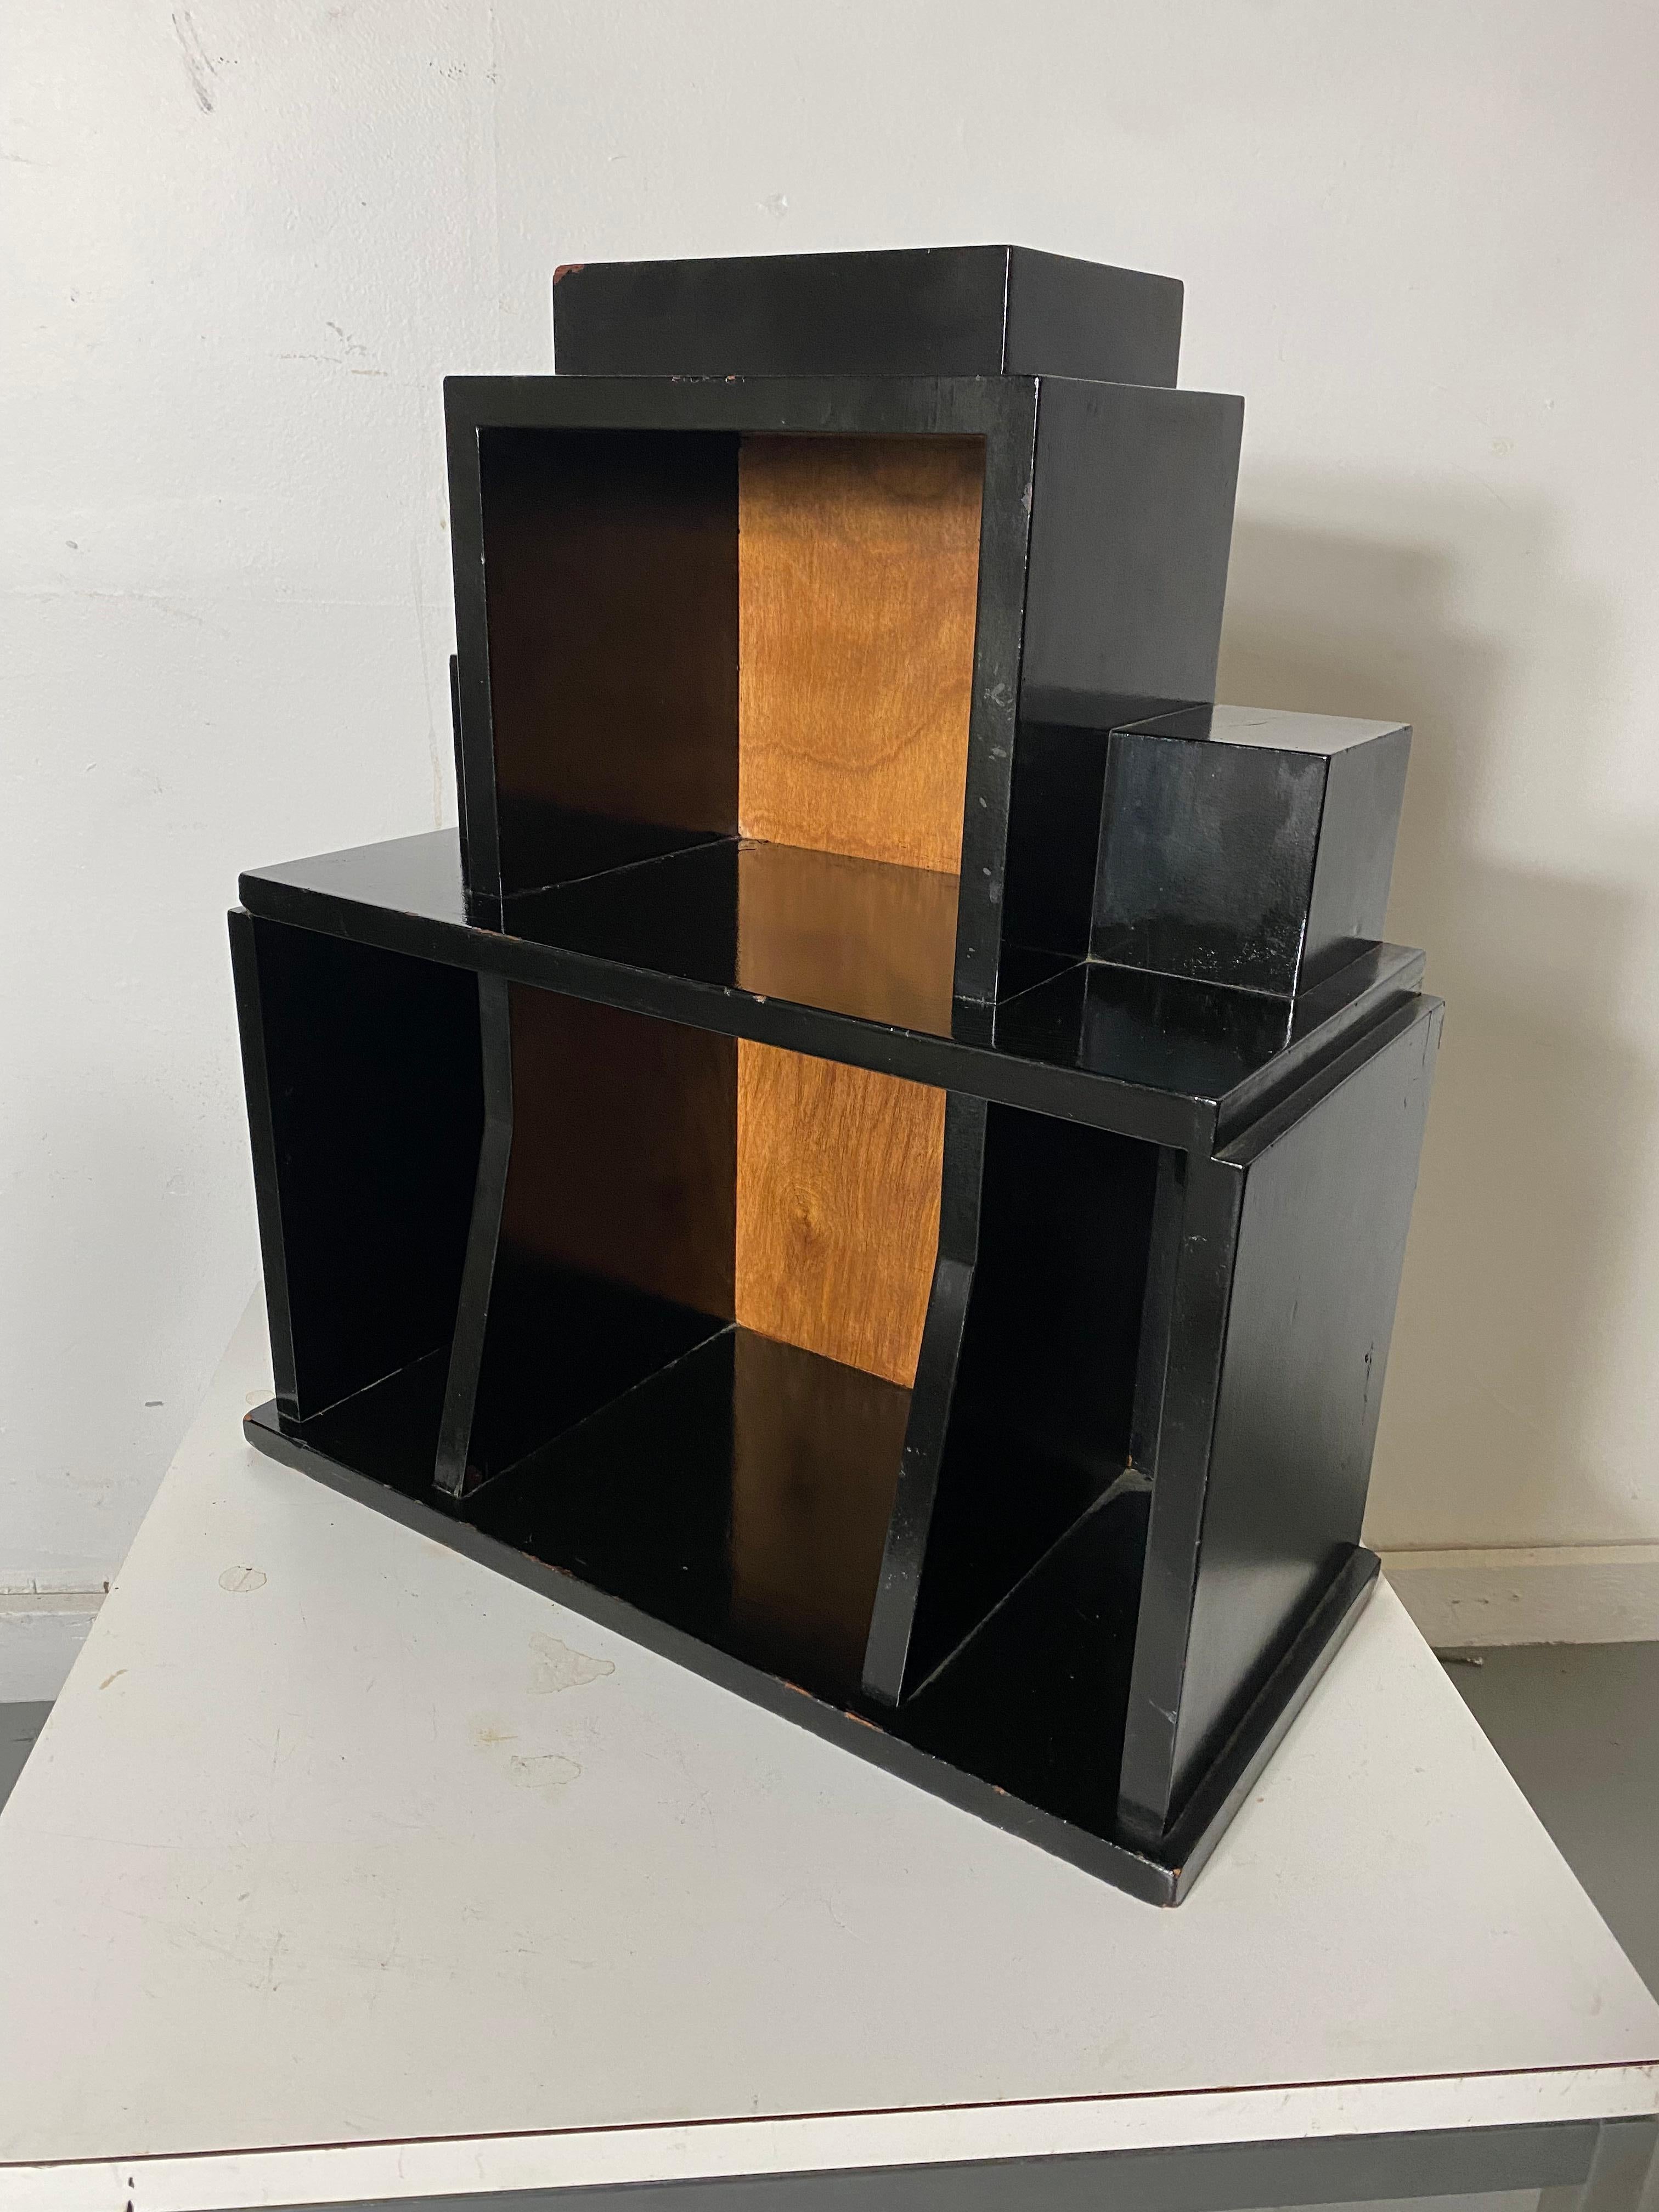 Extremely rare stand, table model 2188, designed by Paul Frankl, Skyscraper Furniture, c 1928. when sold, only avail at Frankl Galleries, New York City. Retains original metal SKYSCRAPER label / tag. Black lacquer and wood finish, Museum quality.